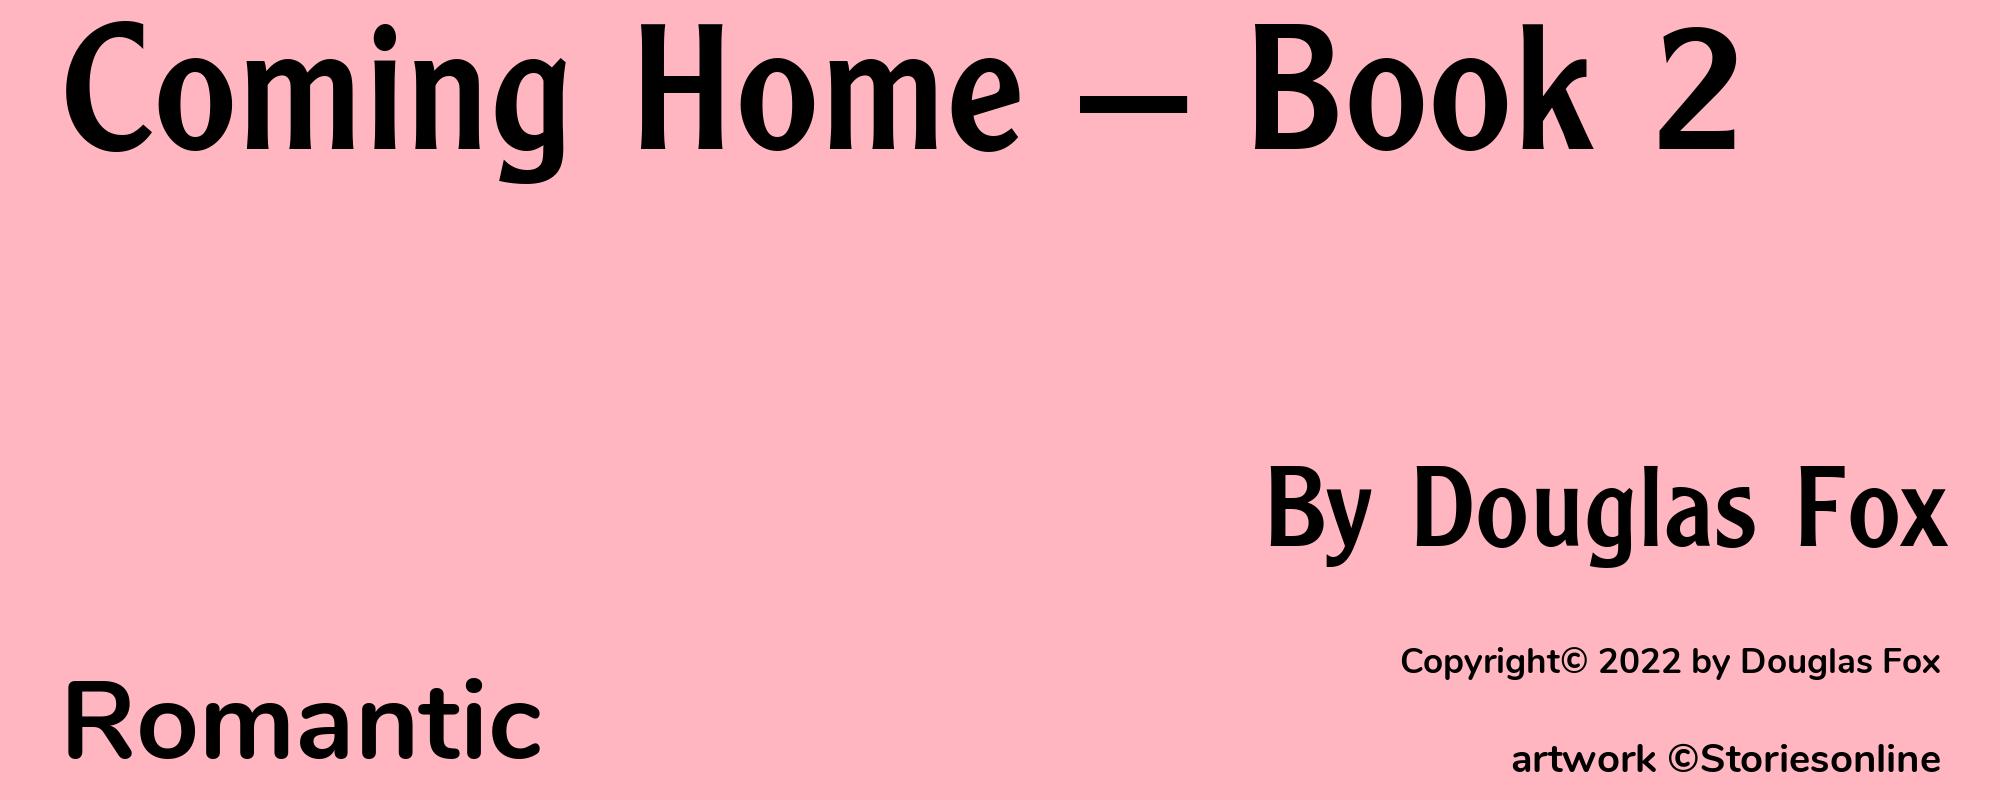 Coming Home — Book 2 - Cover